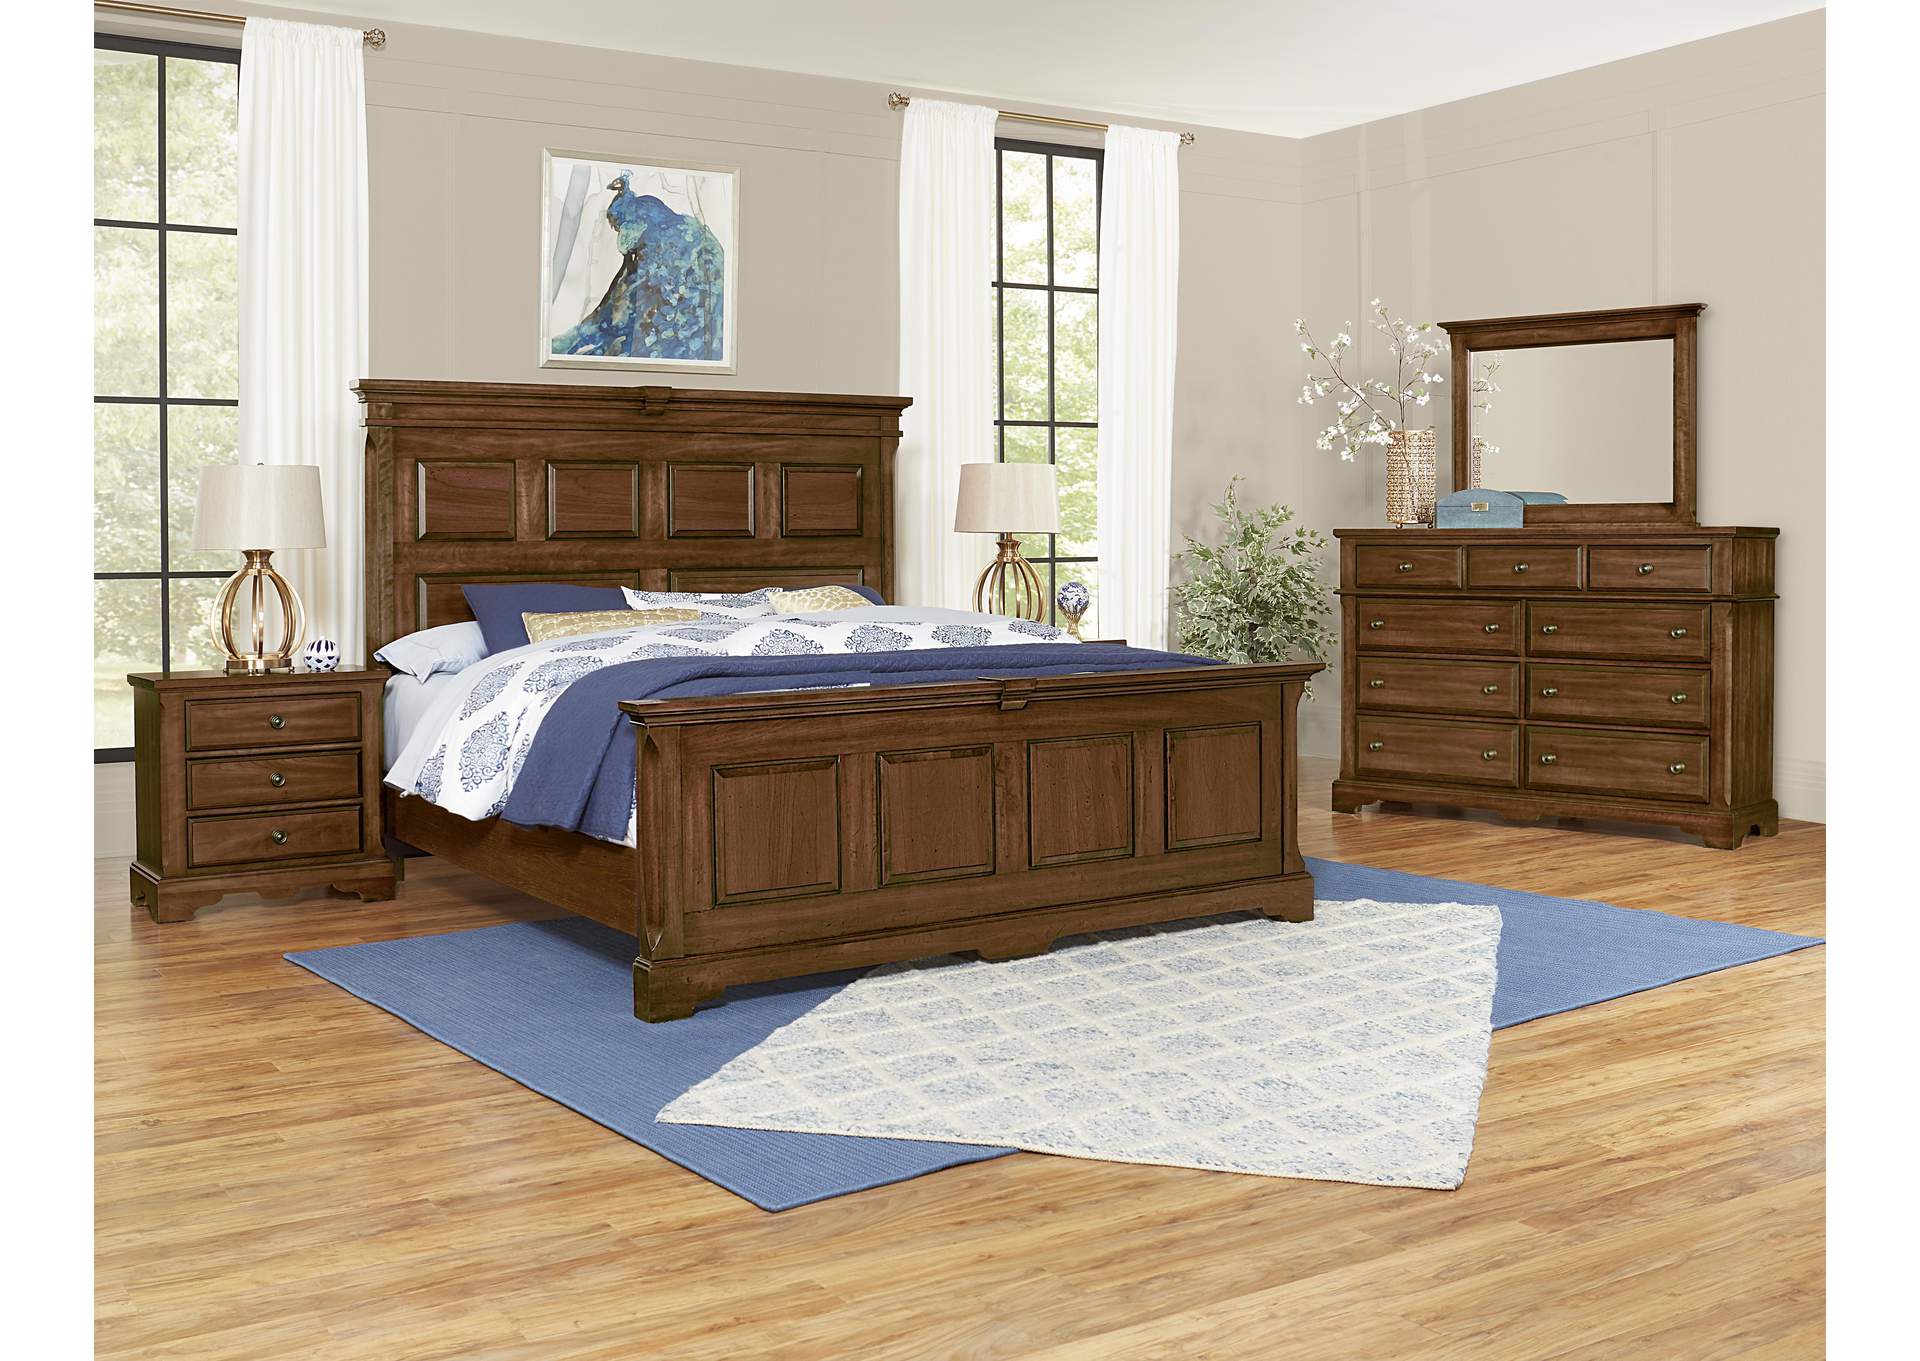 Heritage-Amish Cherry King Mansion Bed,Vaughan-Bassett